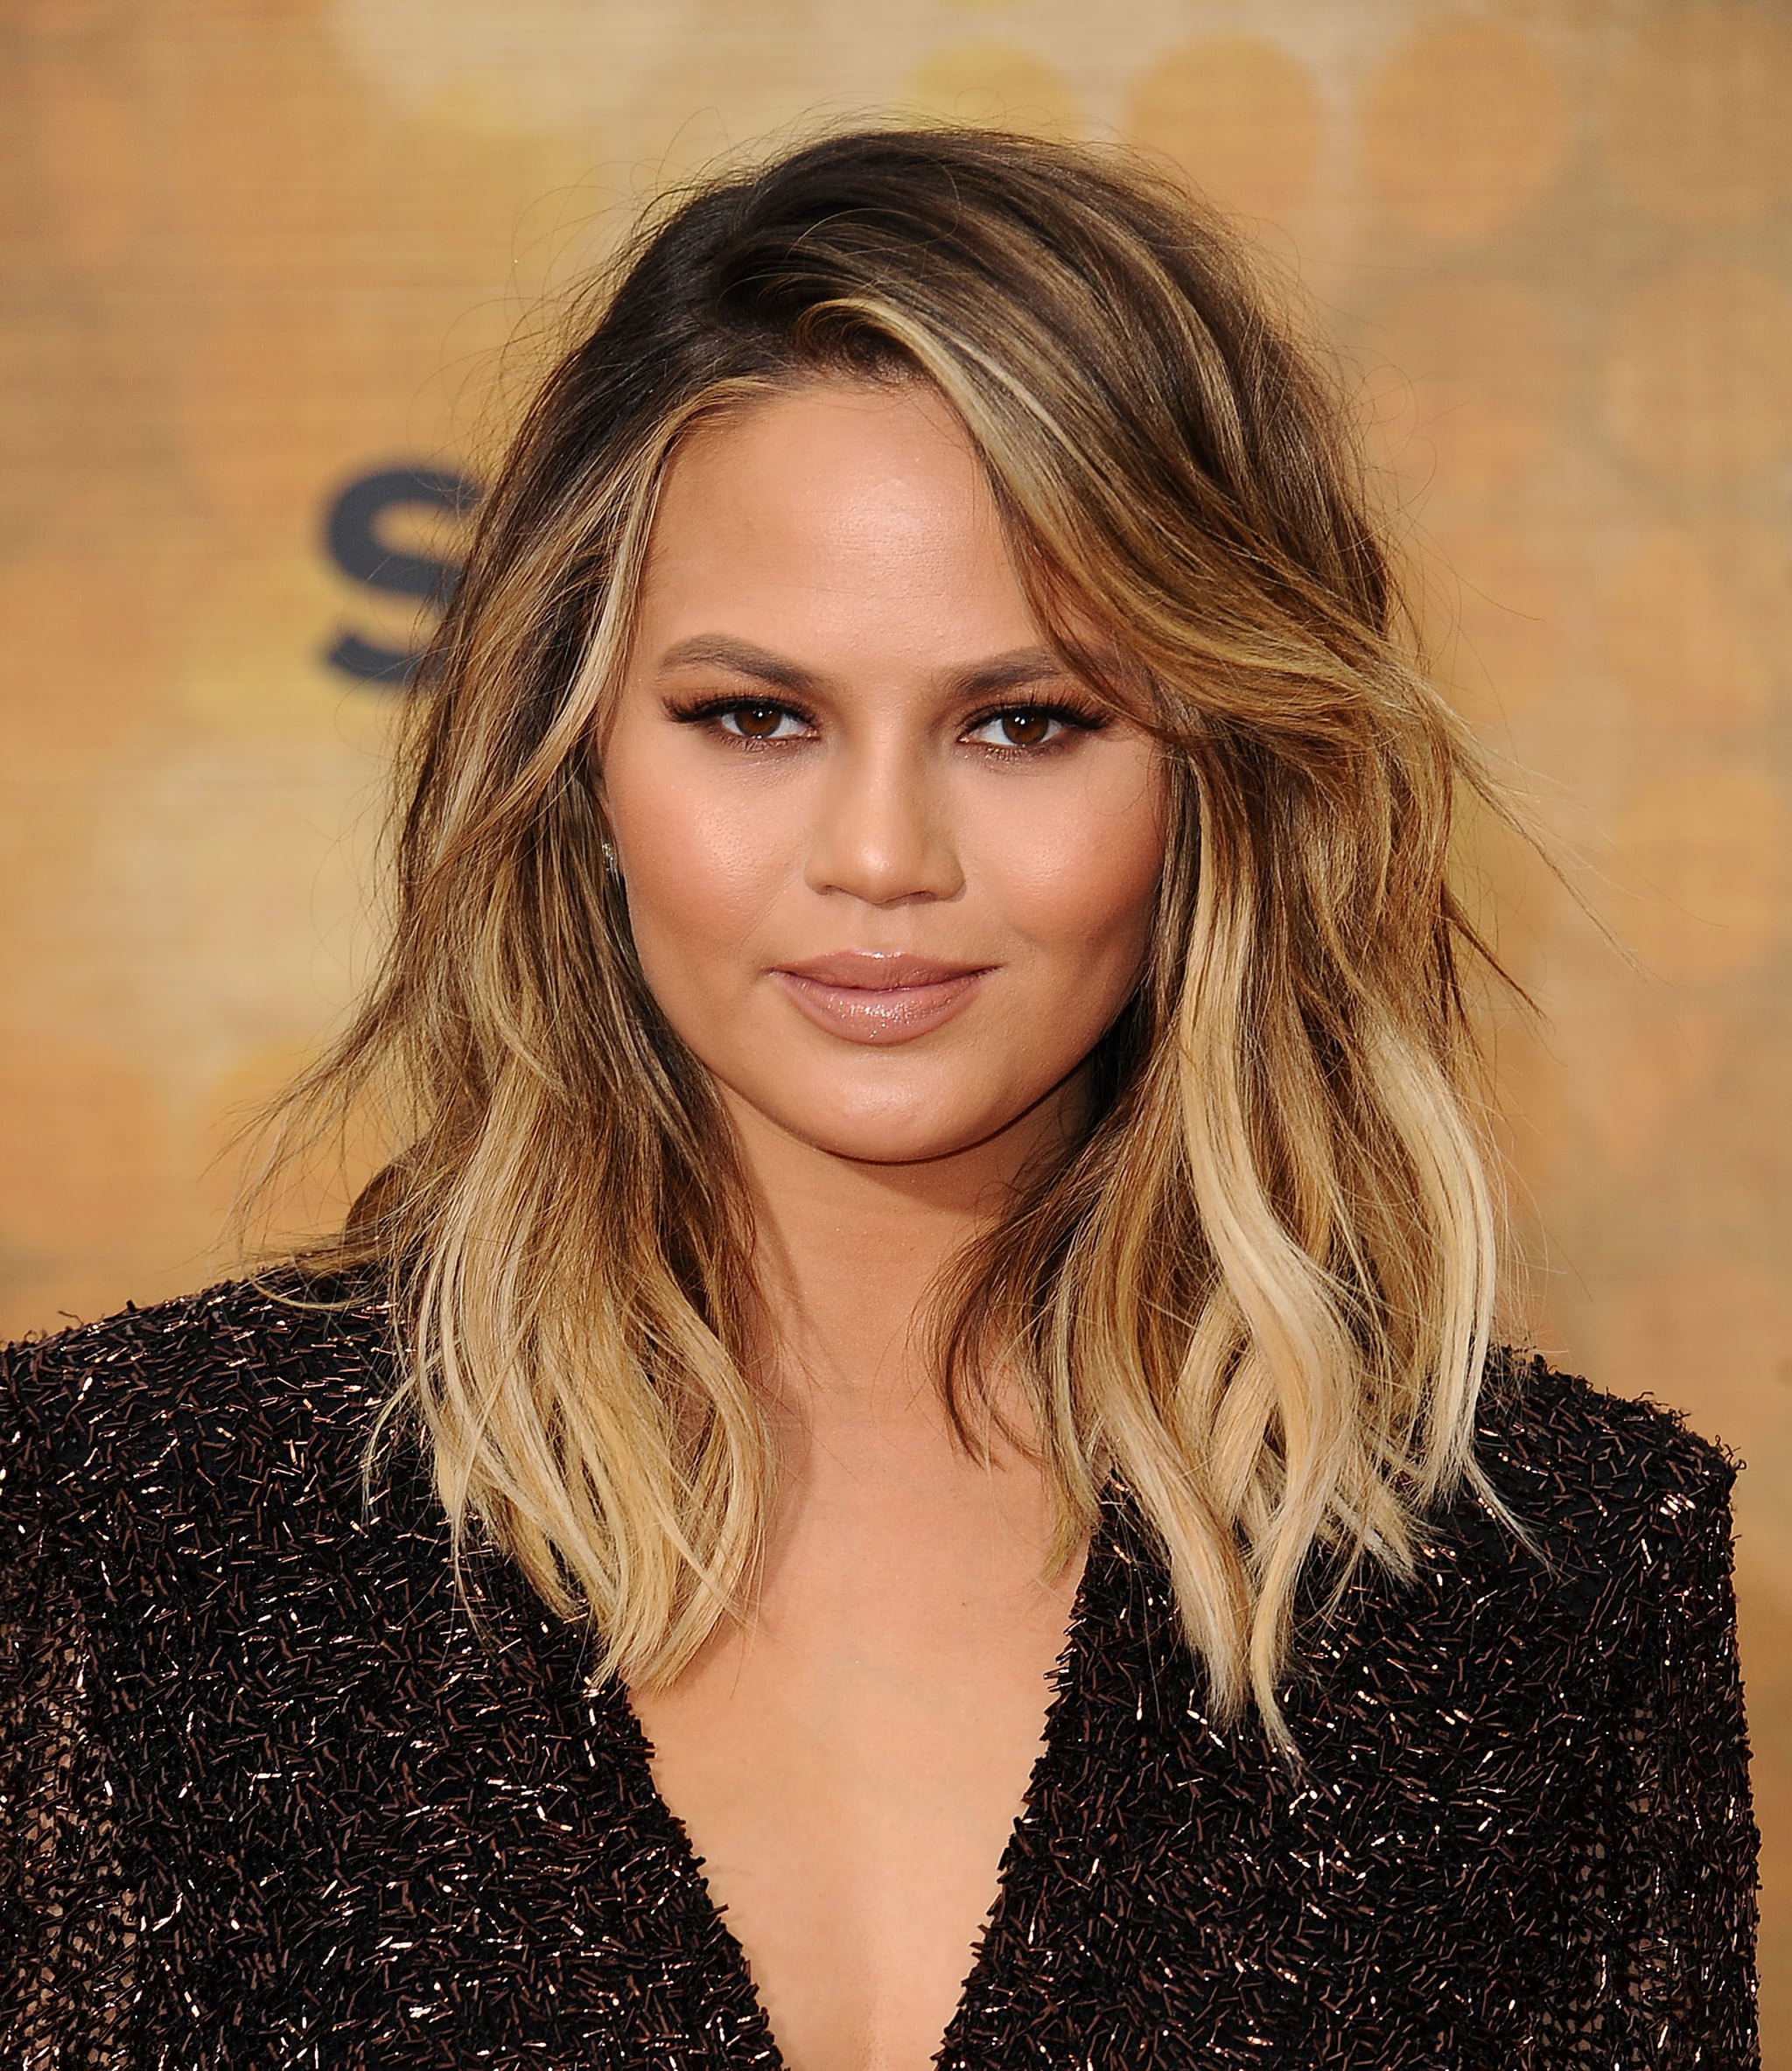 30 Best Hairstyles for Round Face Shapes - Haircuts for Round Faces